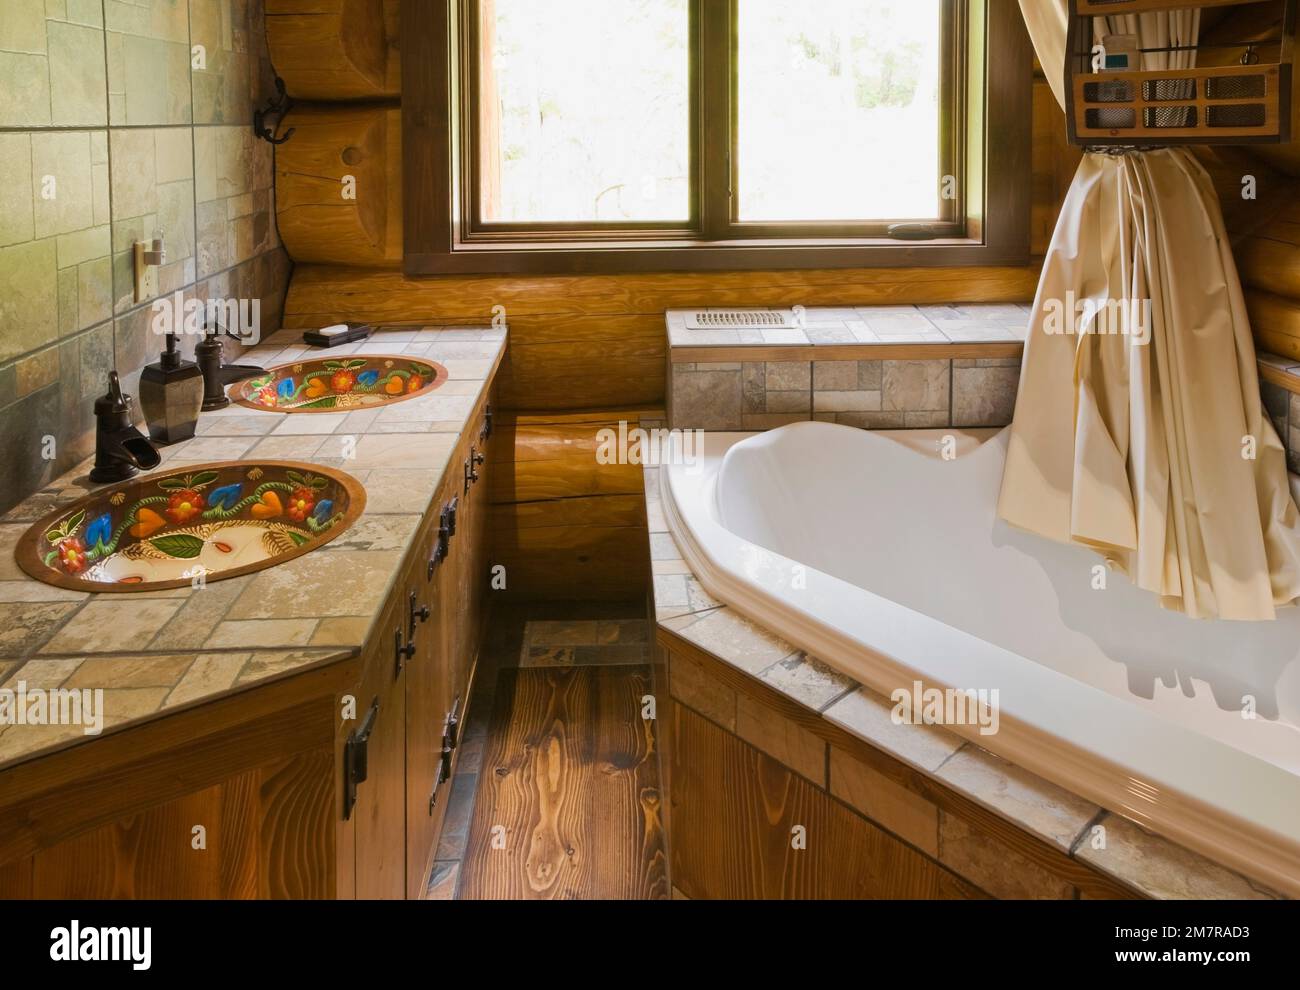 Ceramic tile countertop inlaid with hand painted copper sinks and bathtub in main bathroom inside handcrafted red cedar log home. Stock Photo